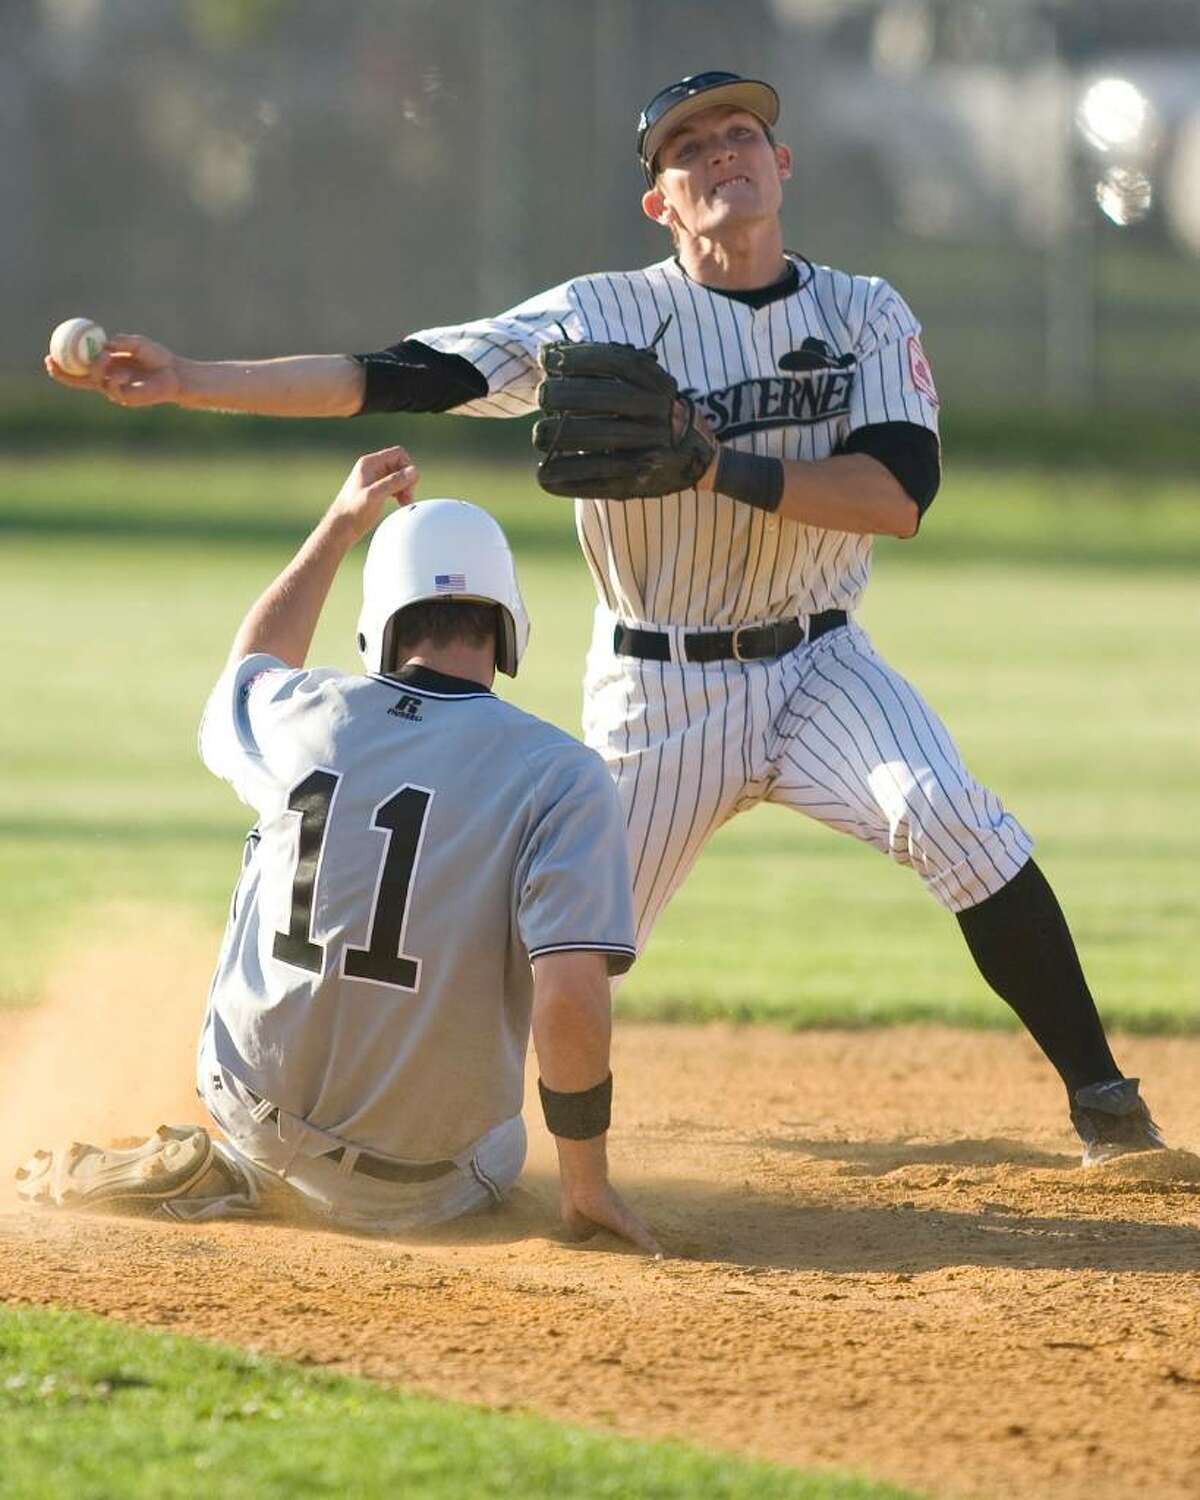 Westerners second baseman Tucker Nathans gets the force on a sliding Joseph Martin of the Bristol Collegiate, but fires to first too late to complete the double play Tuesday night at Rogers Park.